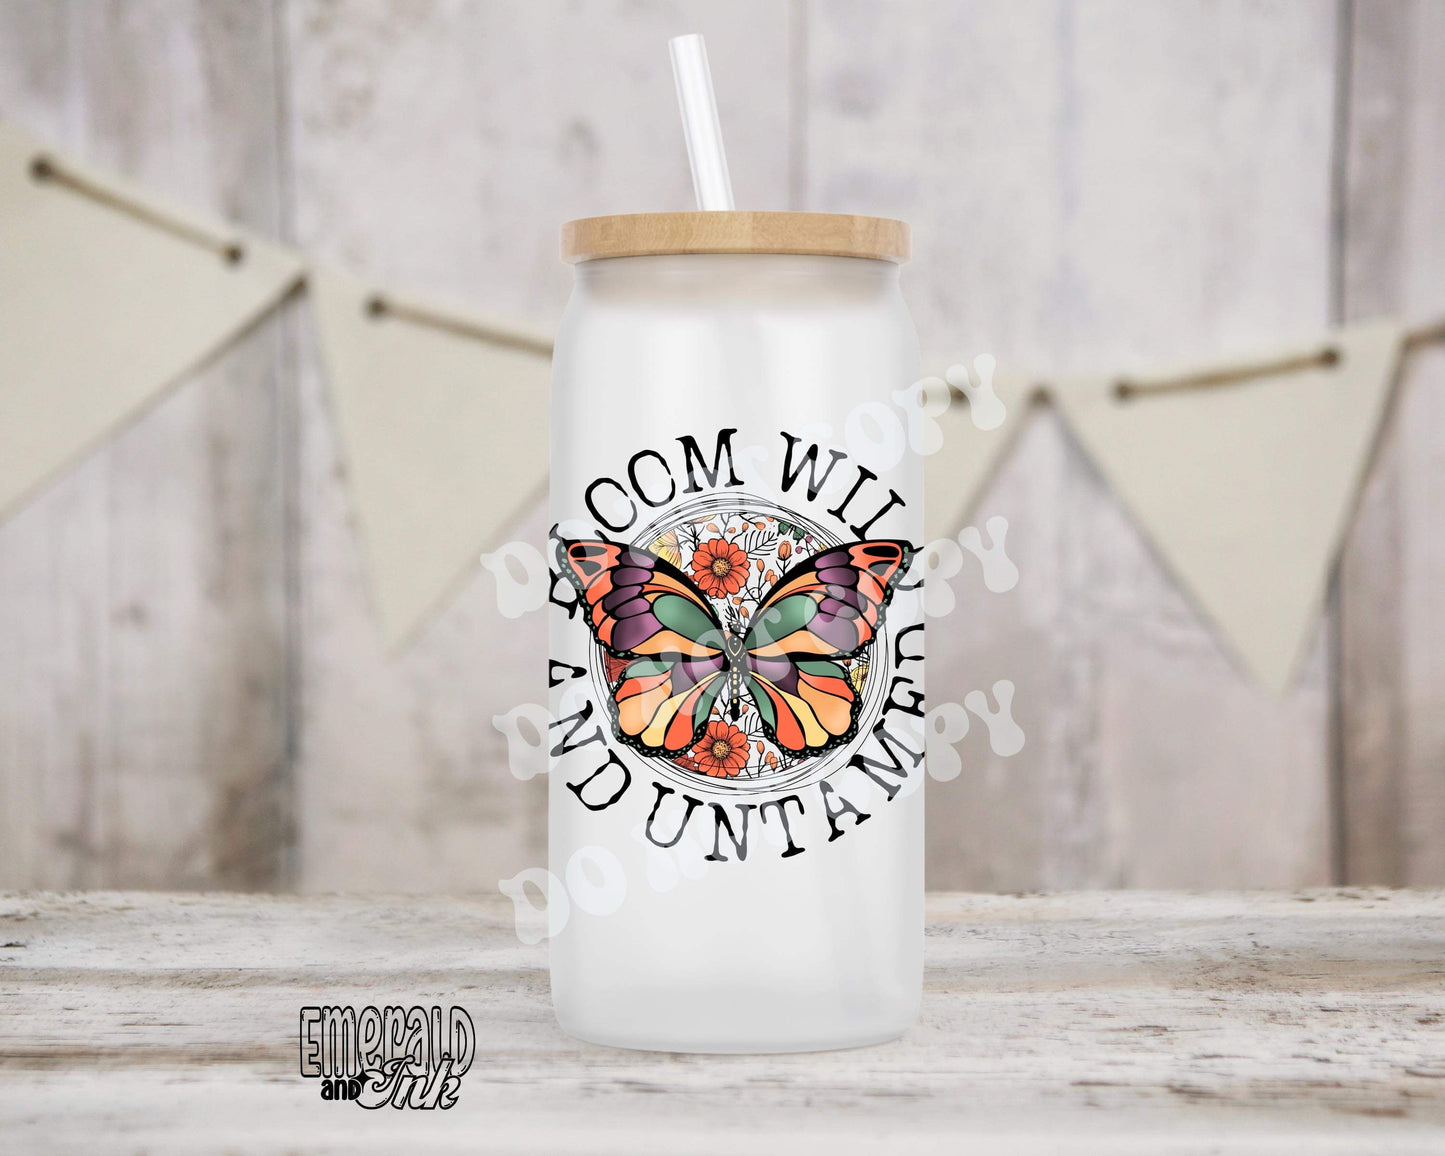 Bloom wild and untamed - Mug/glass can Size Sublimation Transfer